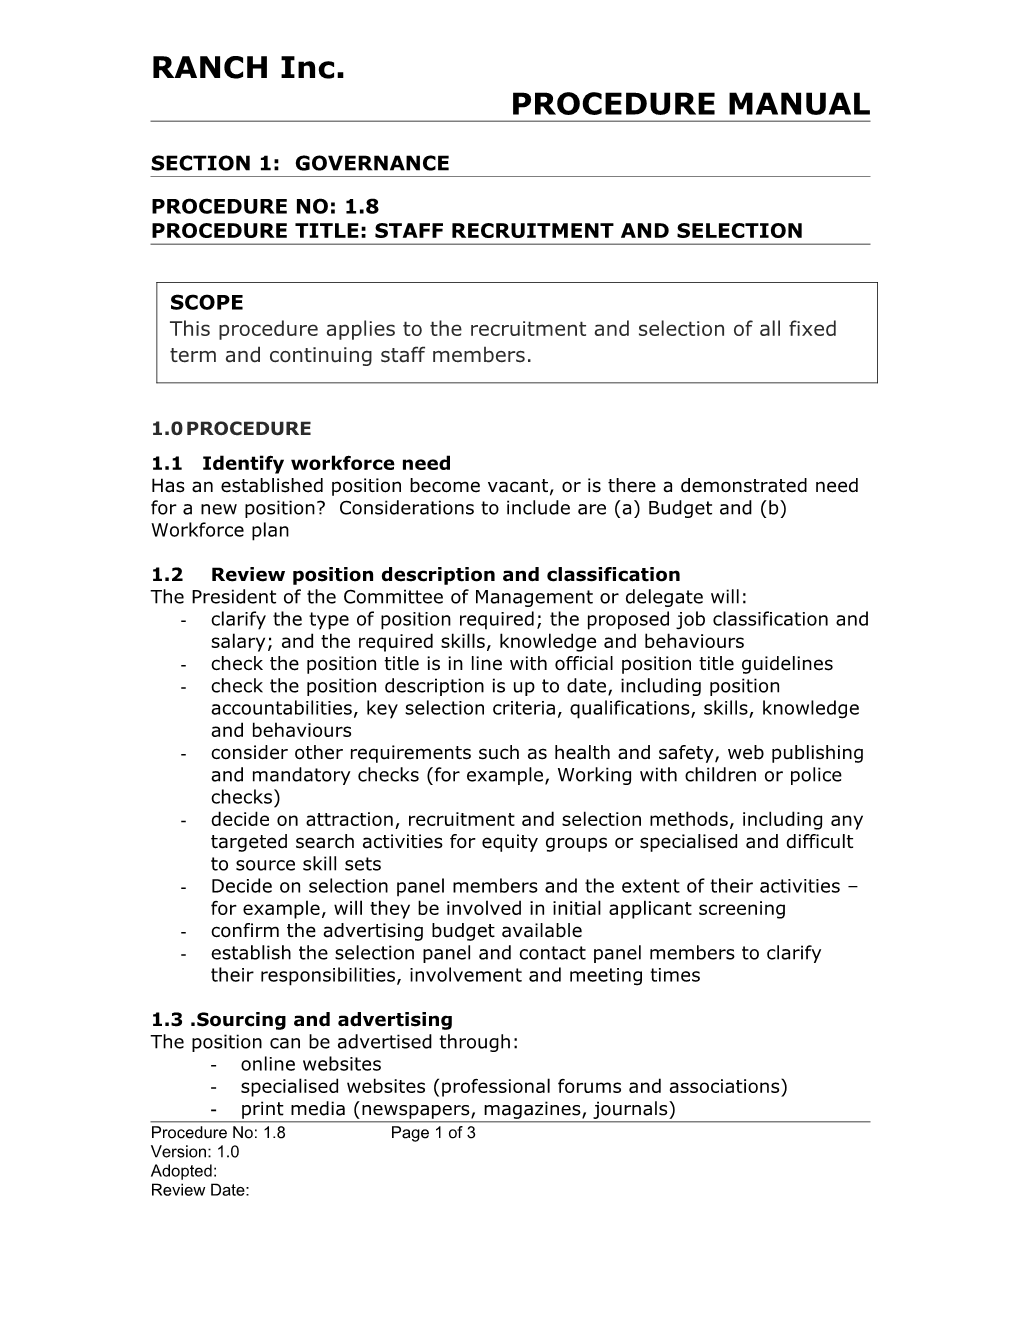 Procedure Title: Staff Recruitment and Selection